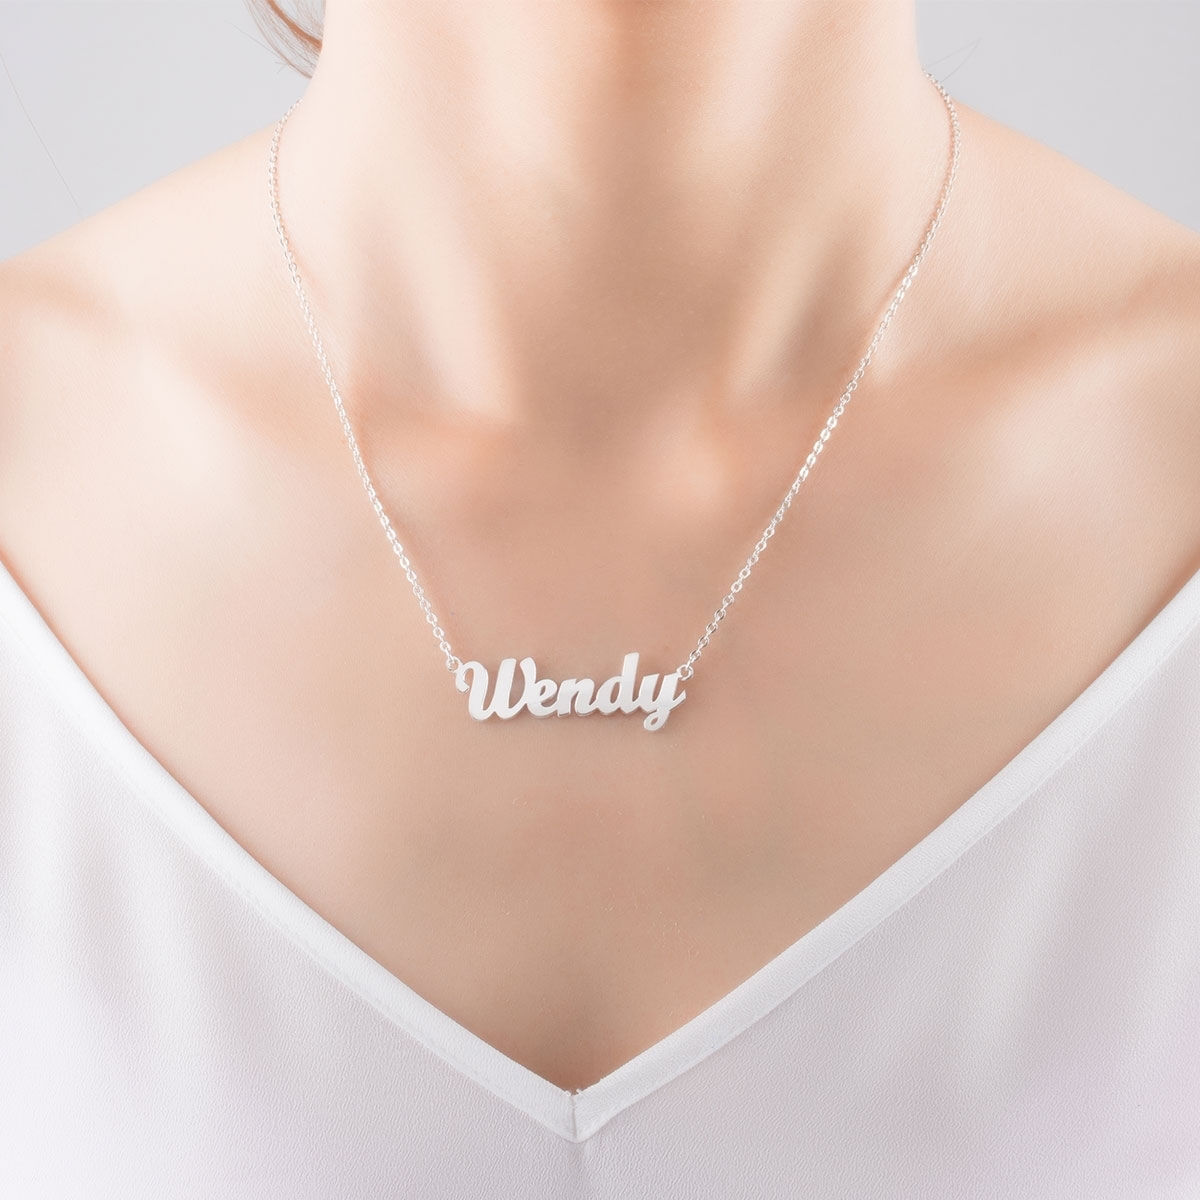 Personalized Name Necklace 925 Sterling Silver Custom with Any Name 14-24